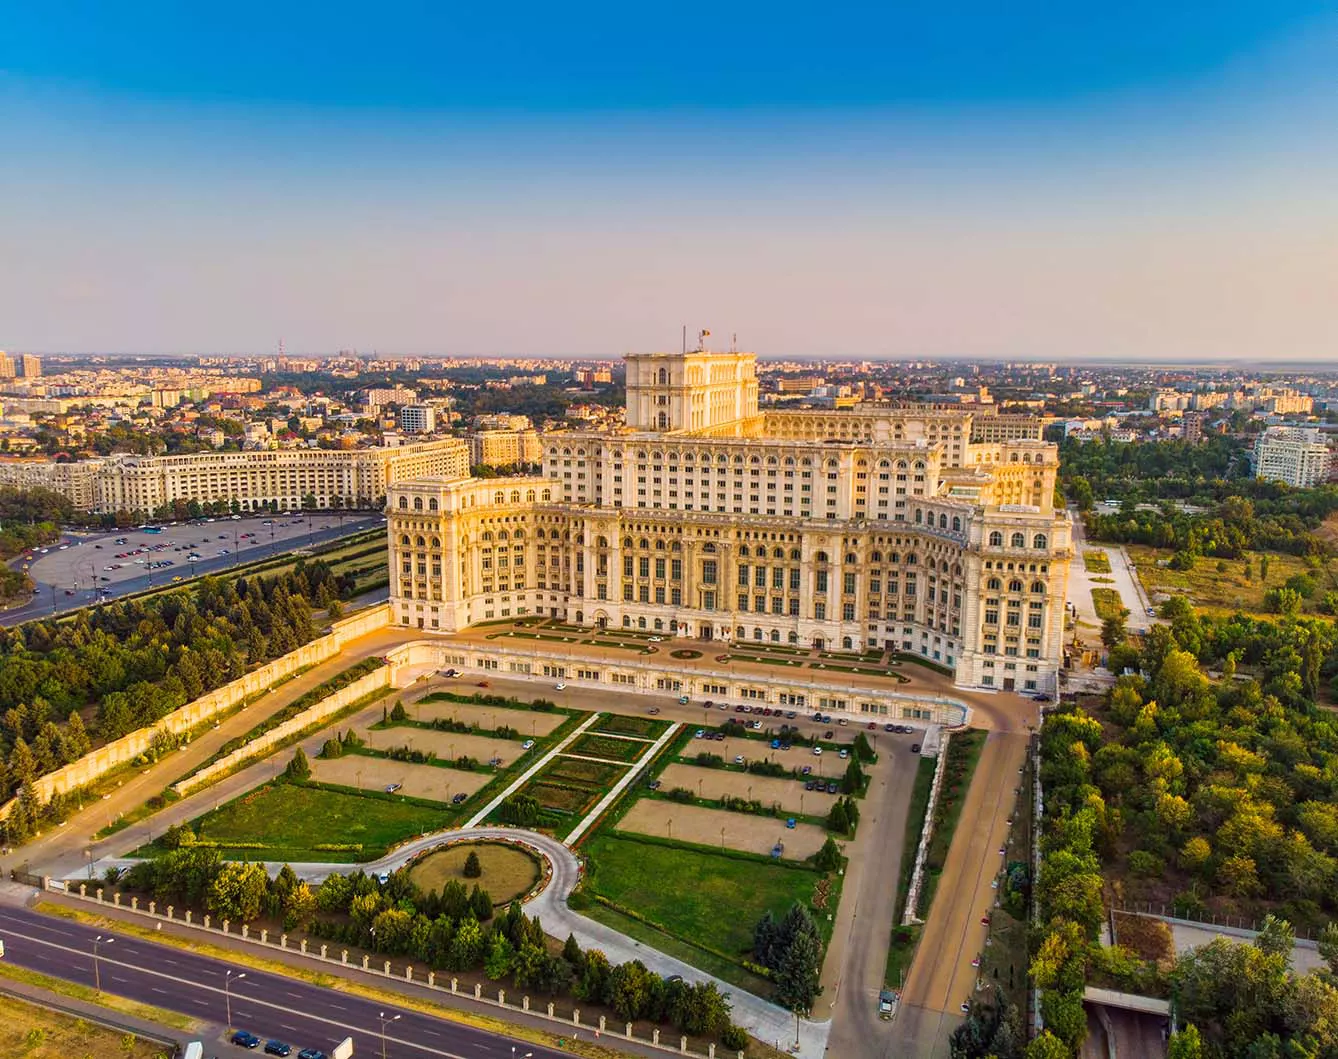 Parliament building or People's House in Bucharest city Aerial view at sunset